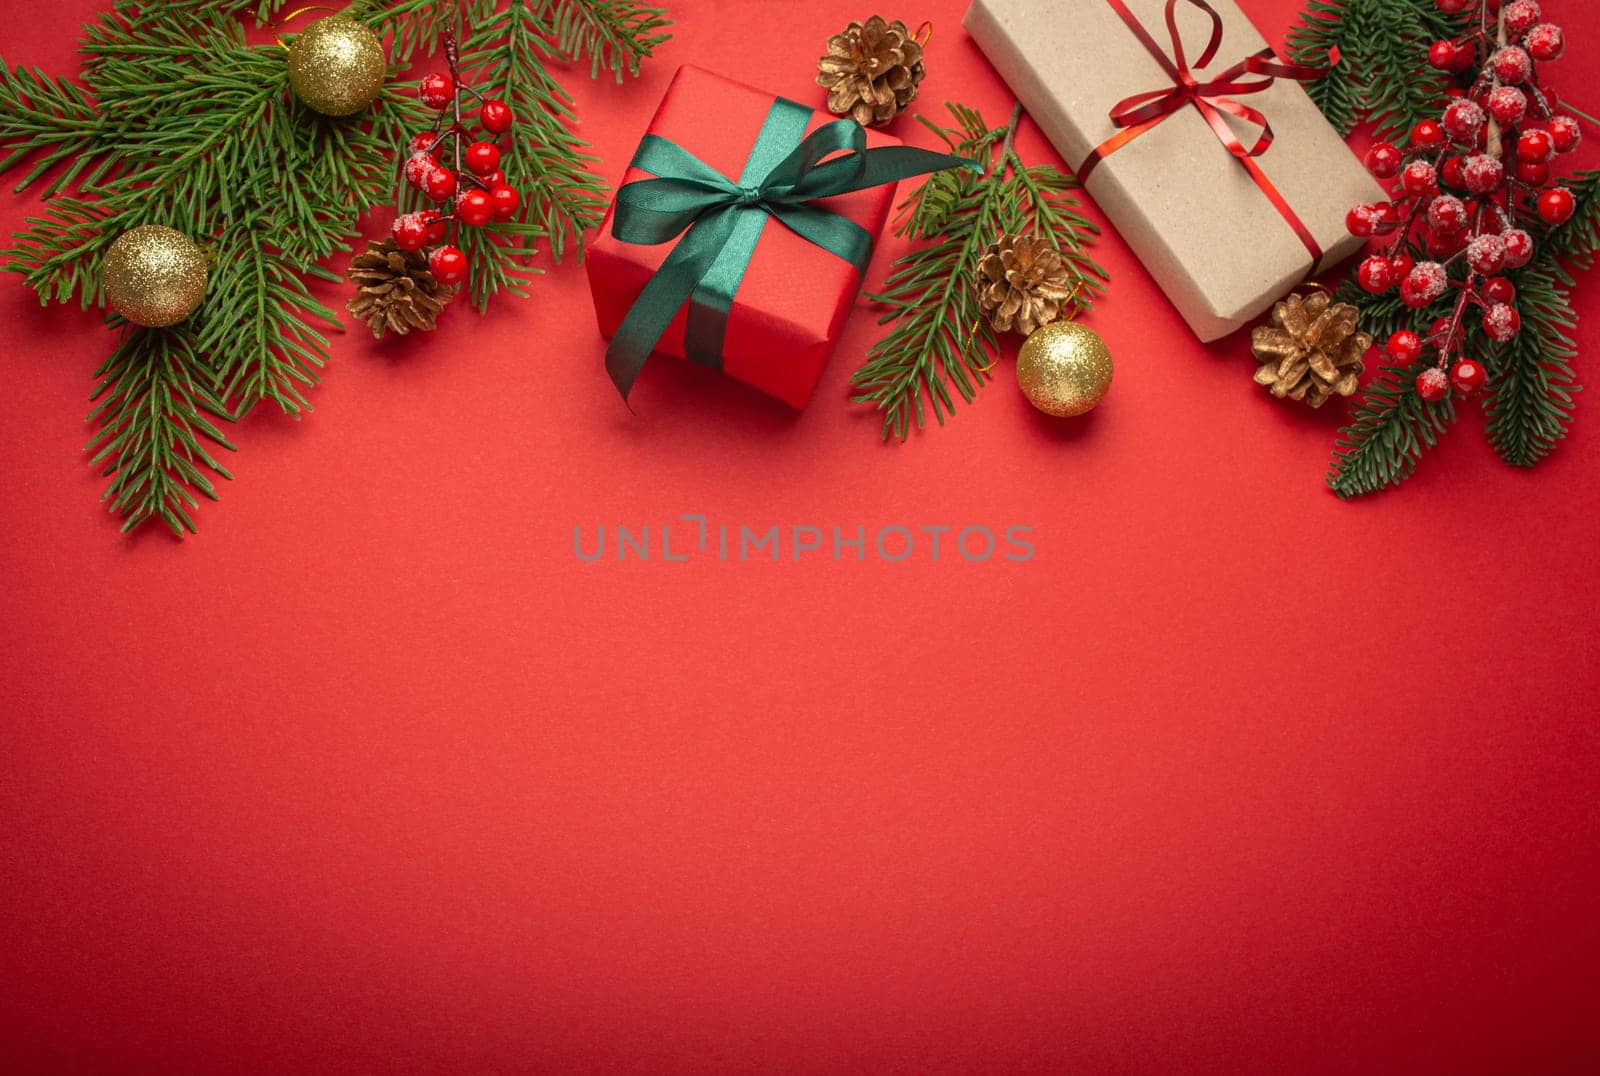 Christmas or New Year celebration red paper festive background with decoration fir tree, wrapped present boxes, cones, berries, sparkly red balls. Space for text. by its_al_dente